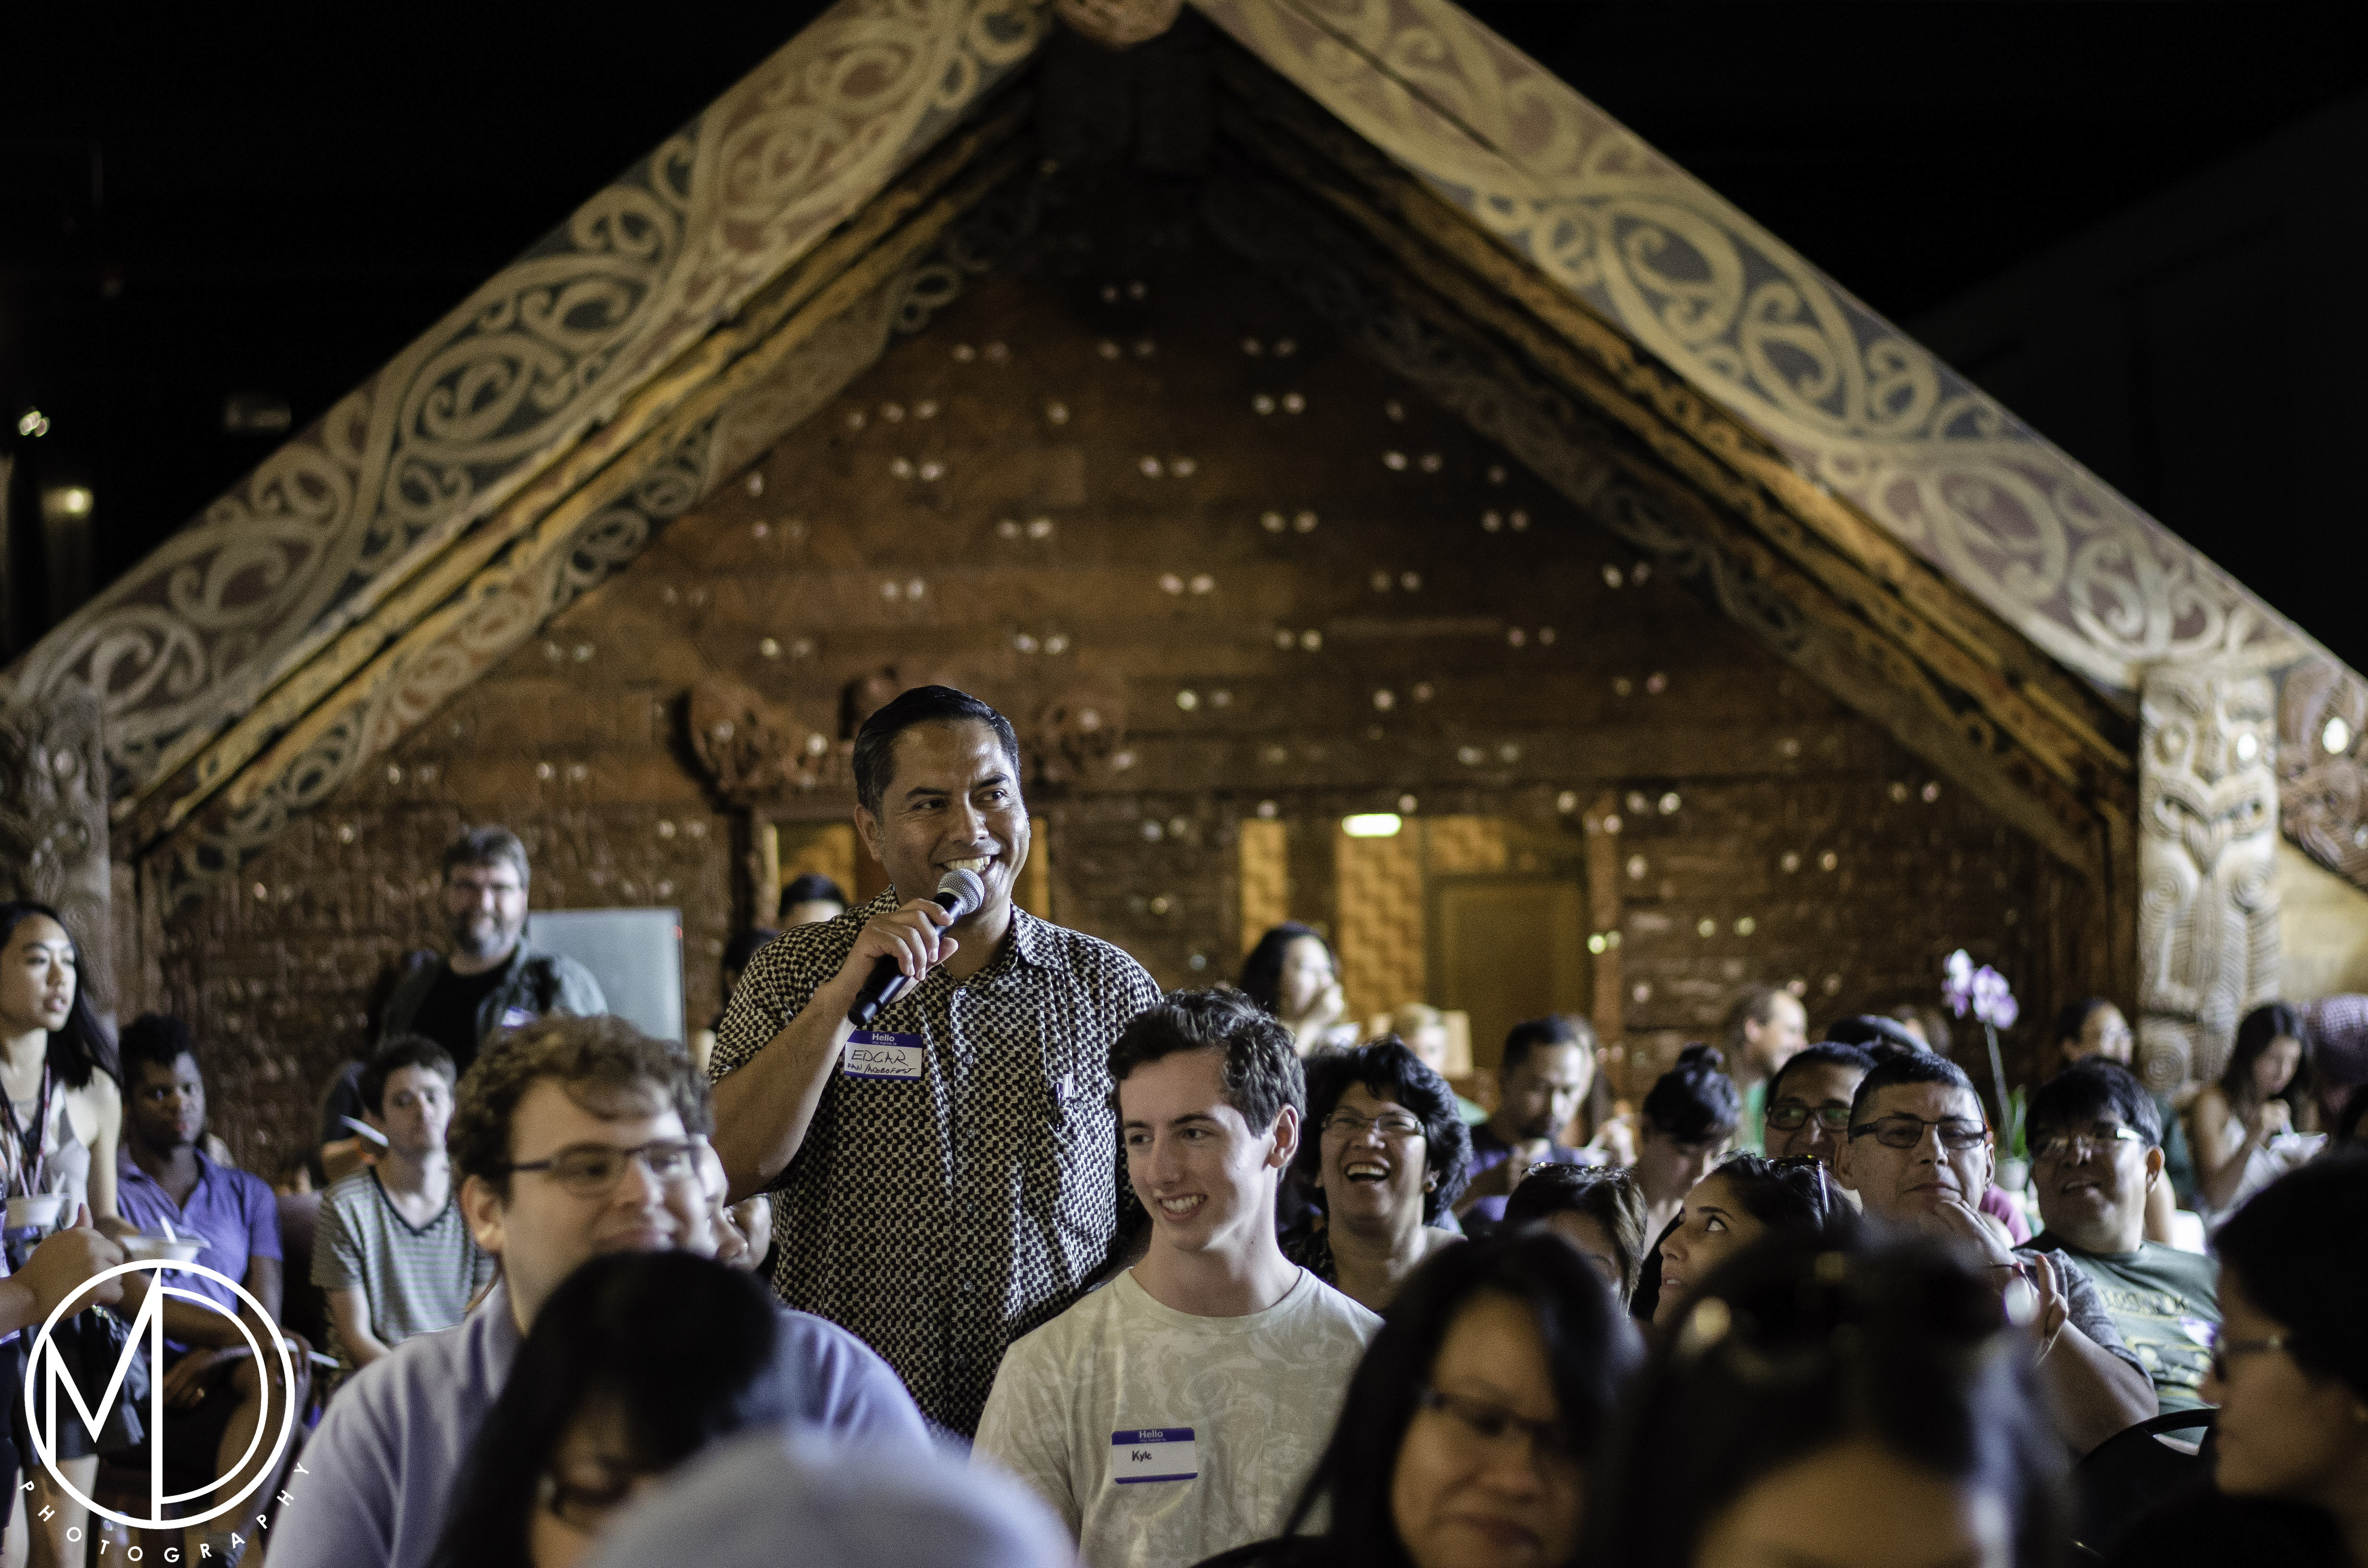 Edgar Jimenez asking a question to our presentors from Filipino Kitchen at the Pamanang Pinoy: Rice event. (c) Field Museum of Natural History - CC BY-NC 4.0